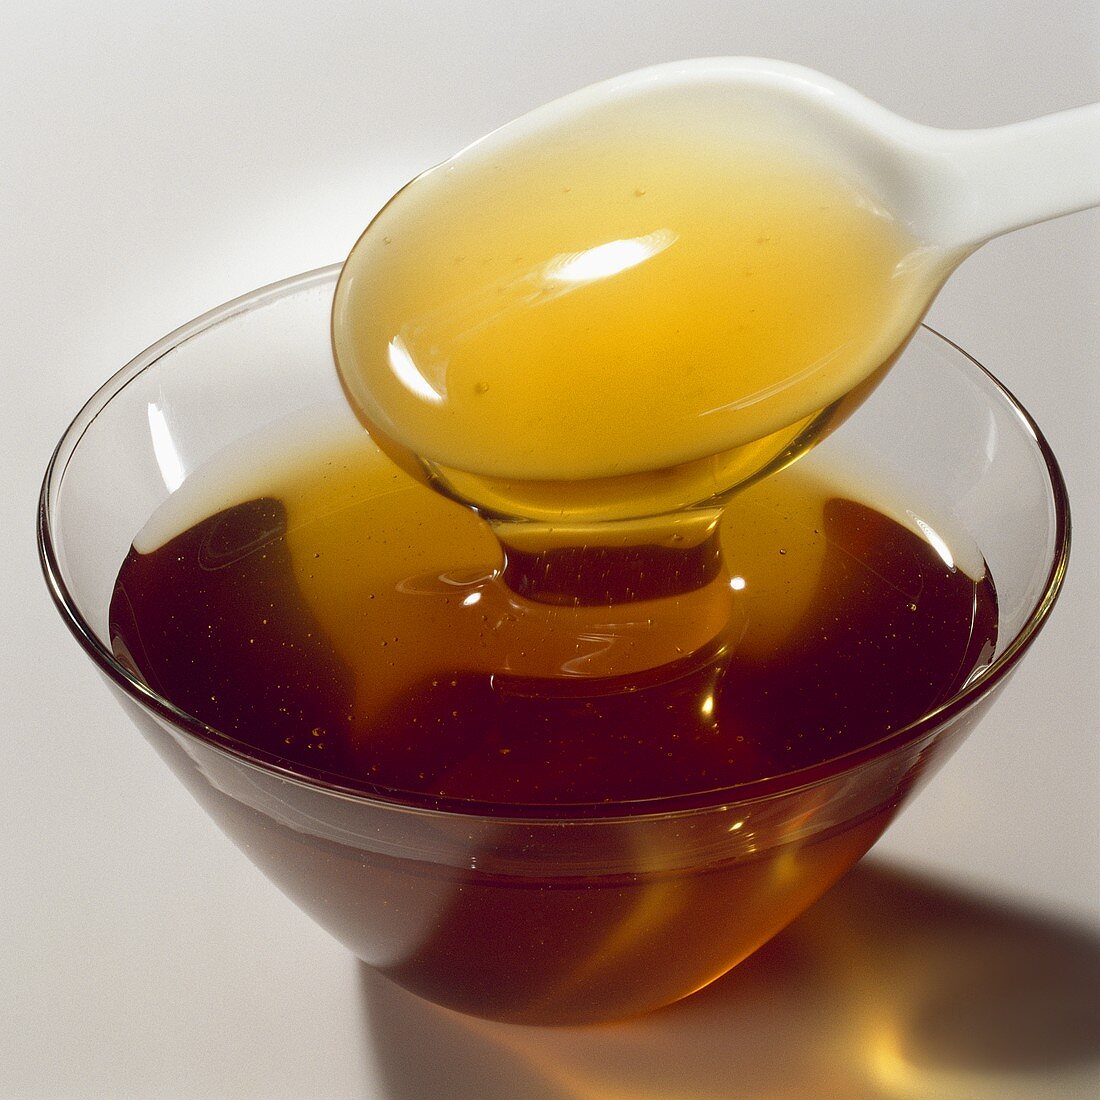 Honey in glass bowl with spoon